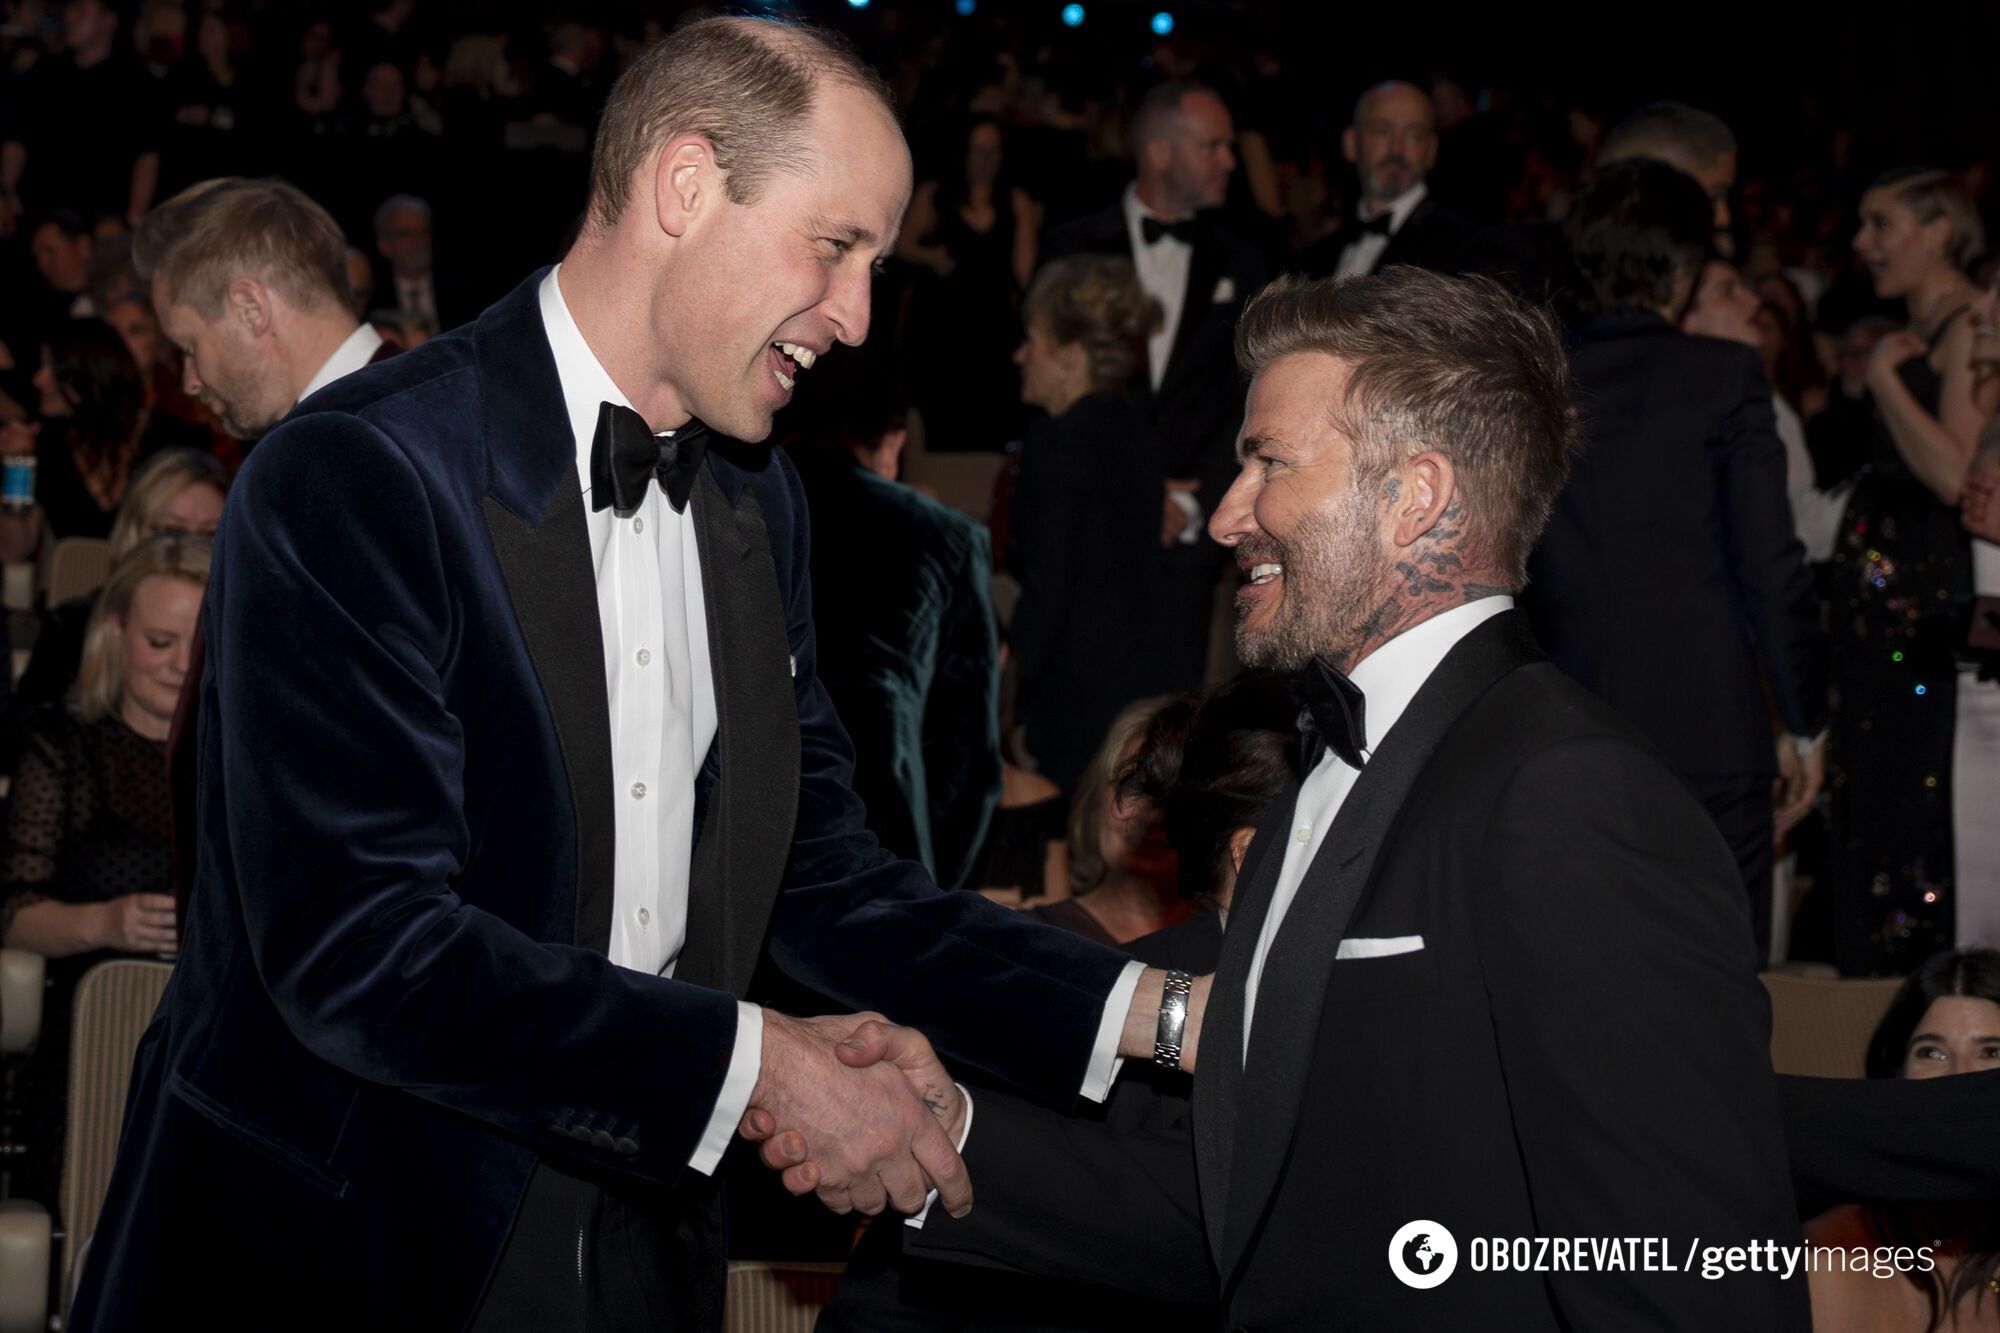 Prince William attended the BAFTAs without Kate Middleton for the first time since 2017. Photo